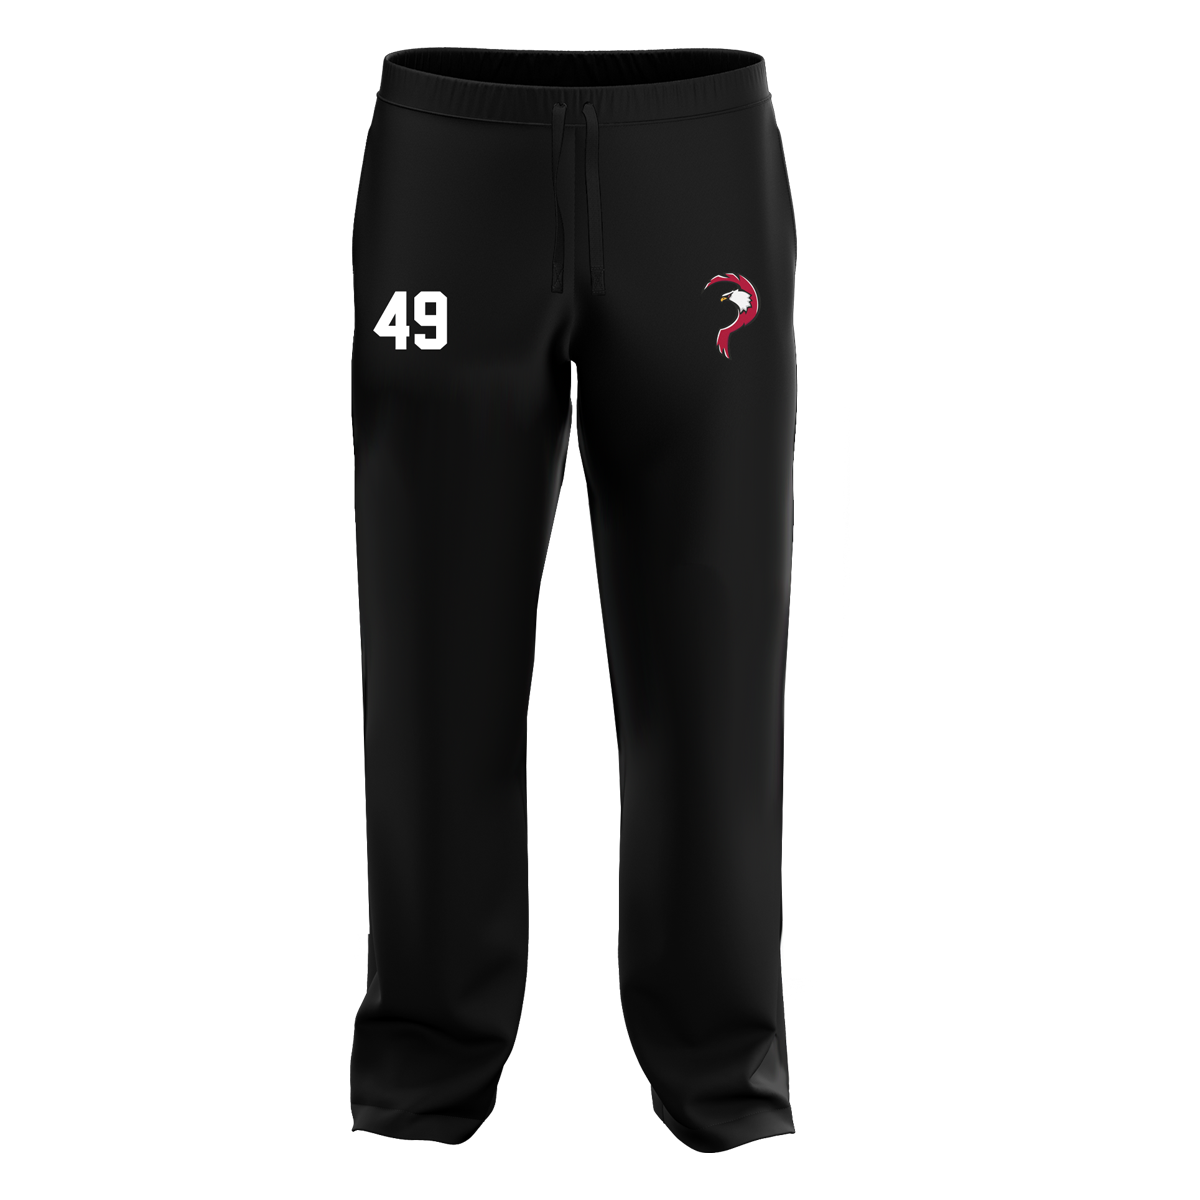 Patriots Basic Sweatpant ST799 with Playernumber/Initials